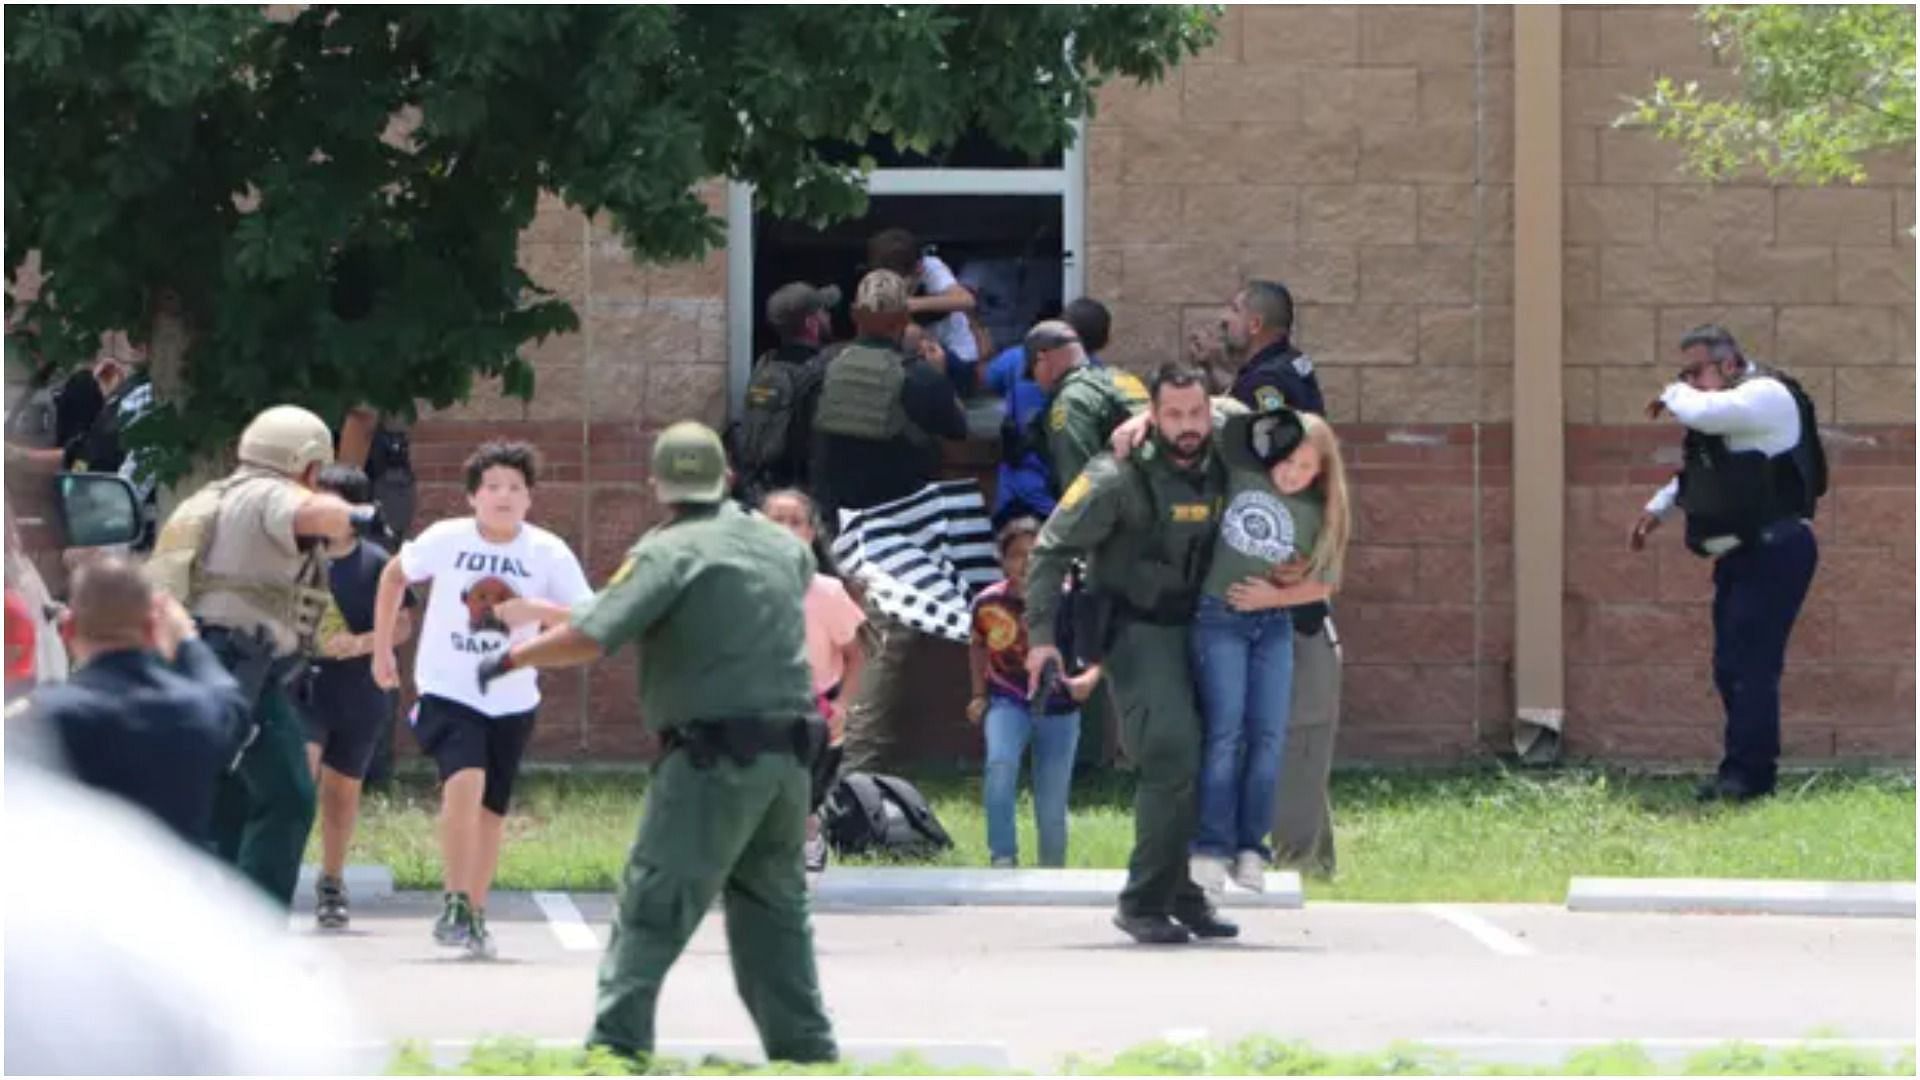 Uvalde authorities have been accused of shifting blame to a Robb Elementary school teacher for leaving a back entrance open for the shooter during the mass shooting (Photo via Pete Luna)